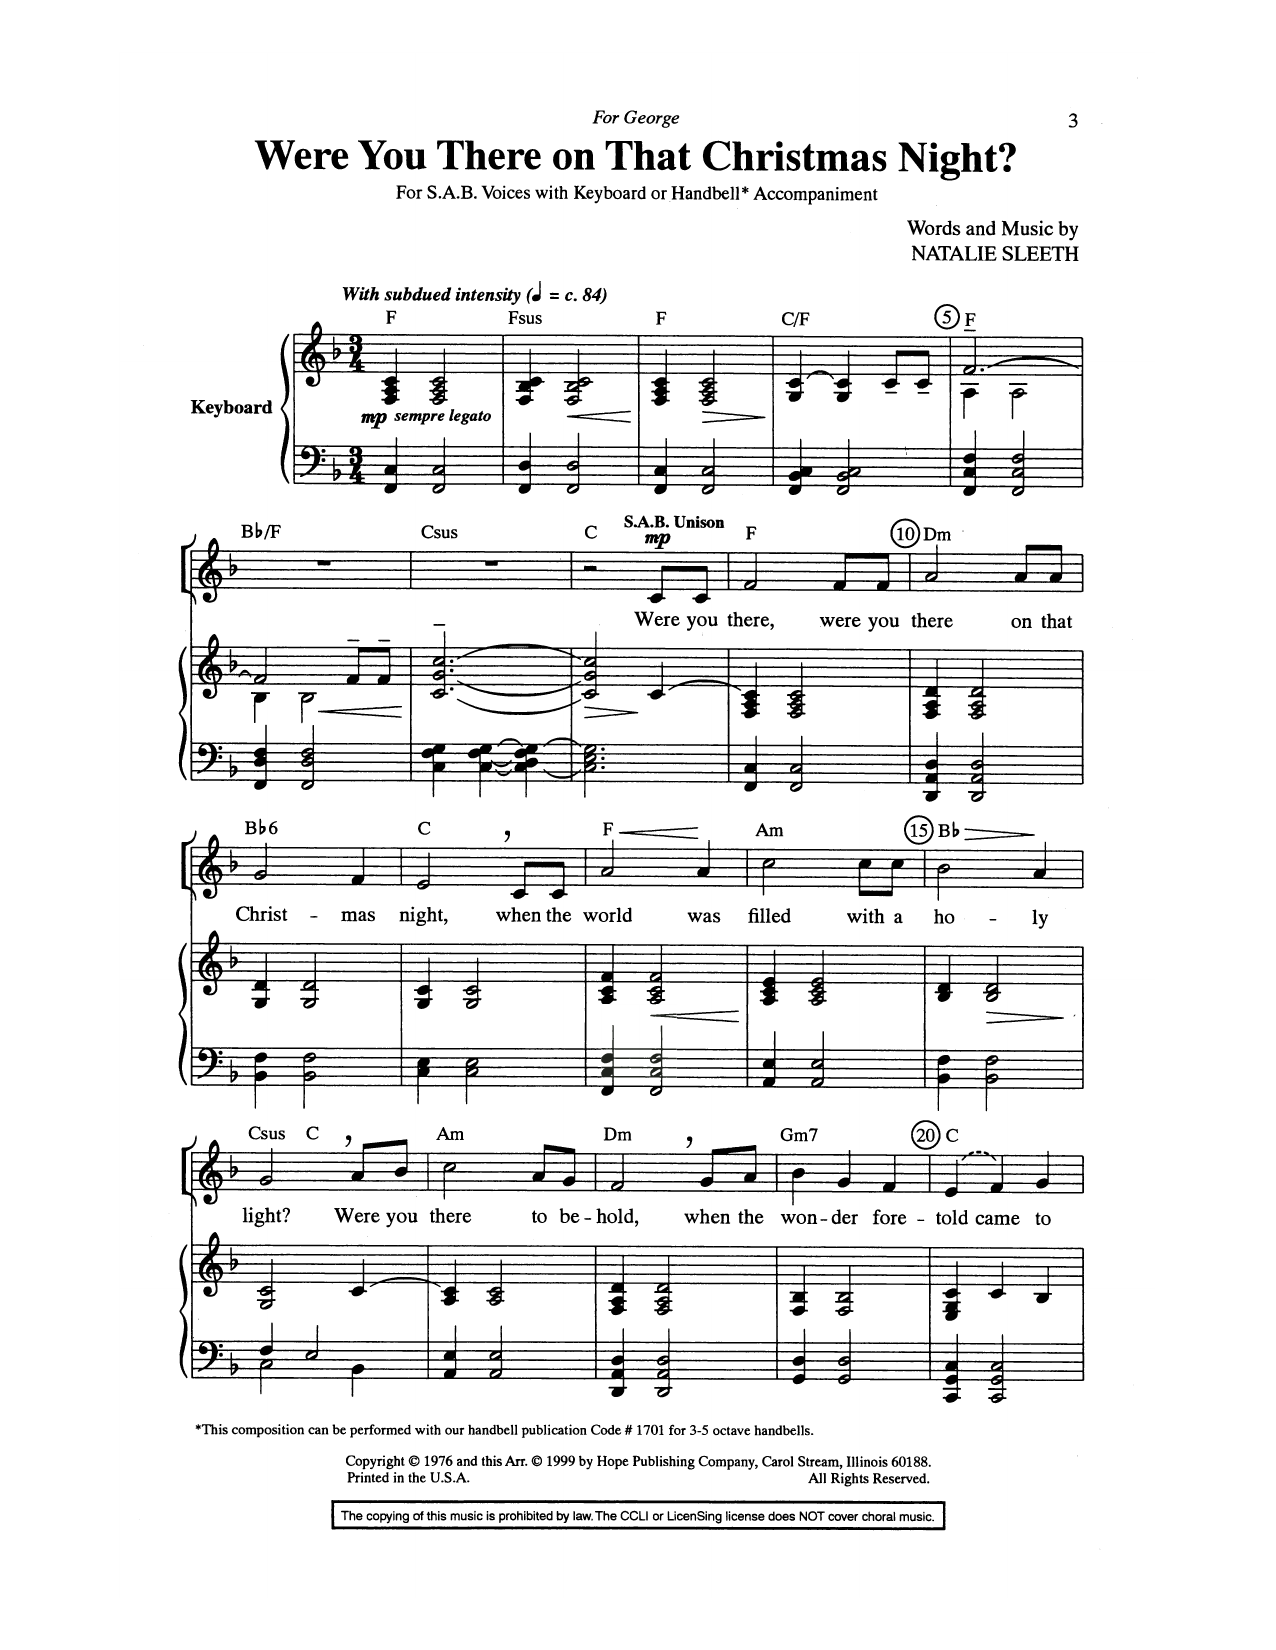 Download Natalie Sleeth Were You There On That Christmas Night? Sheet Music